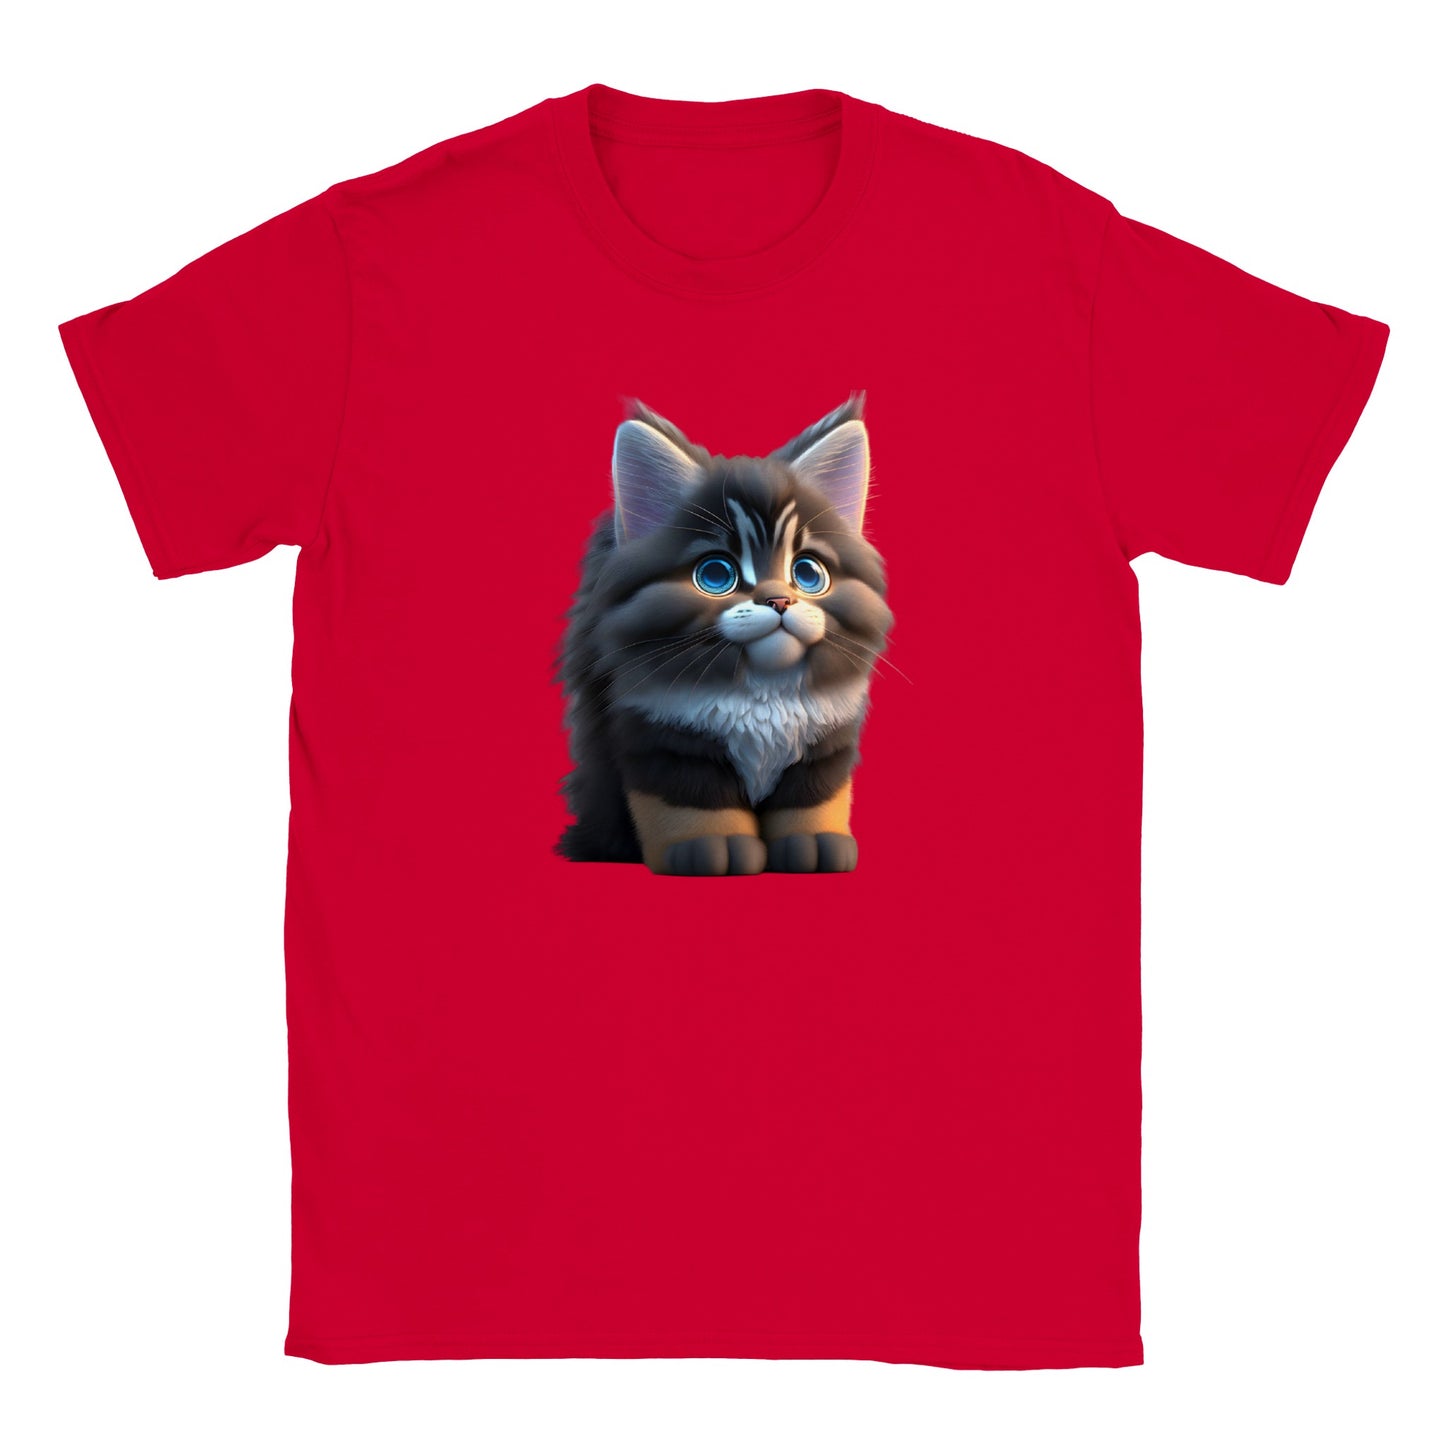 Adorable, Cool, Cute Cats and Kittens Toy - Classic Kids Crewneck T-Shirt 3